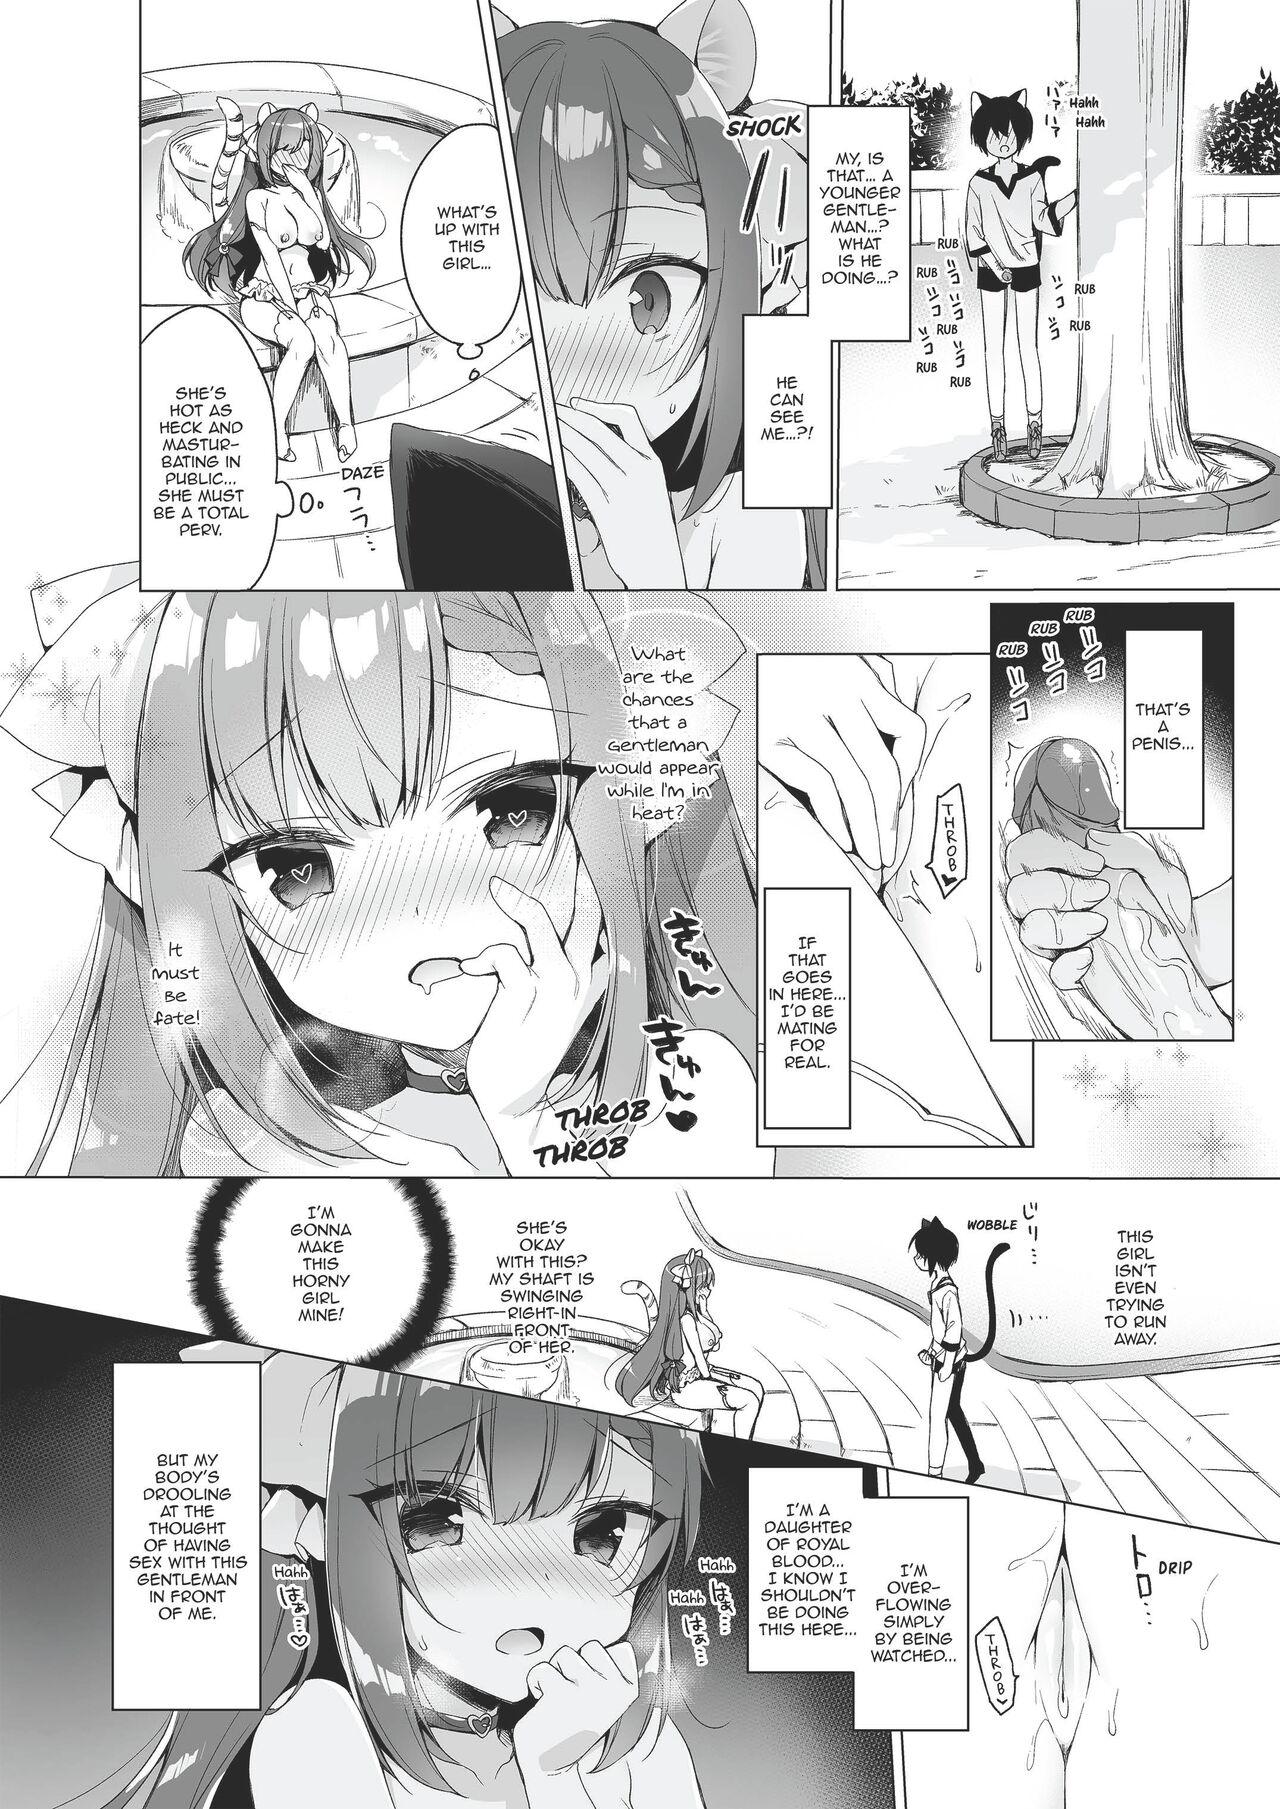 Spit Boku no Risou no Isekai Seikatsu 9 | My Ideal Life in Another World 9 - Original Exposed - Page 10